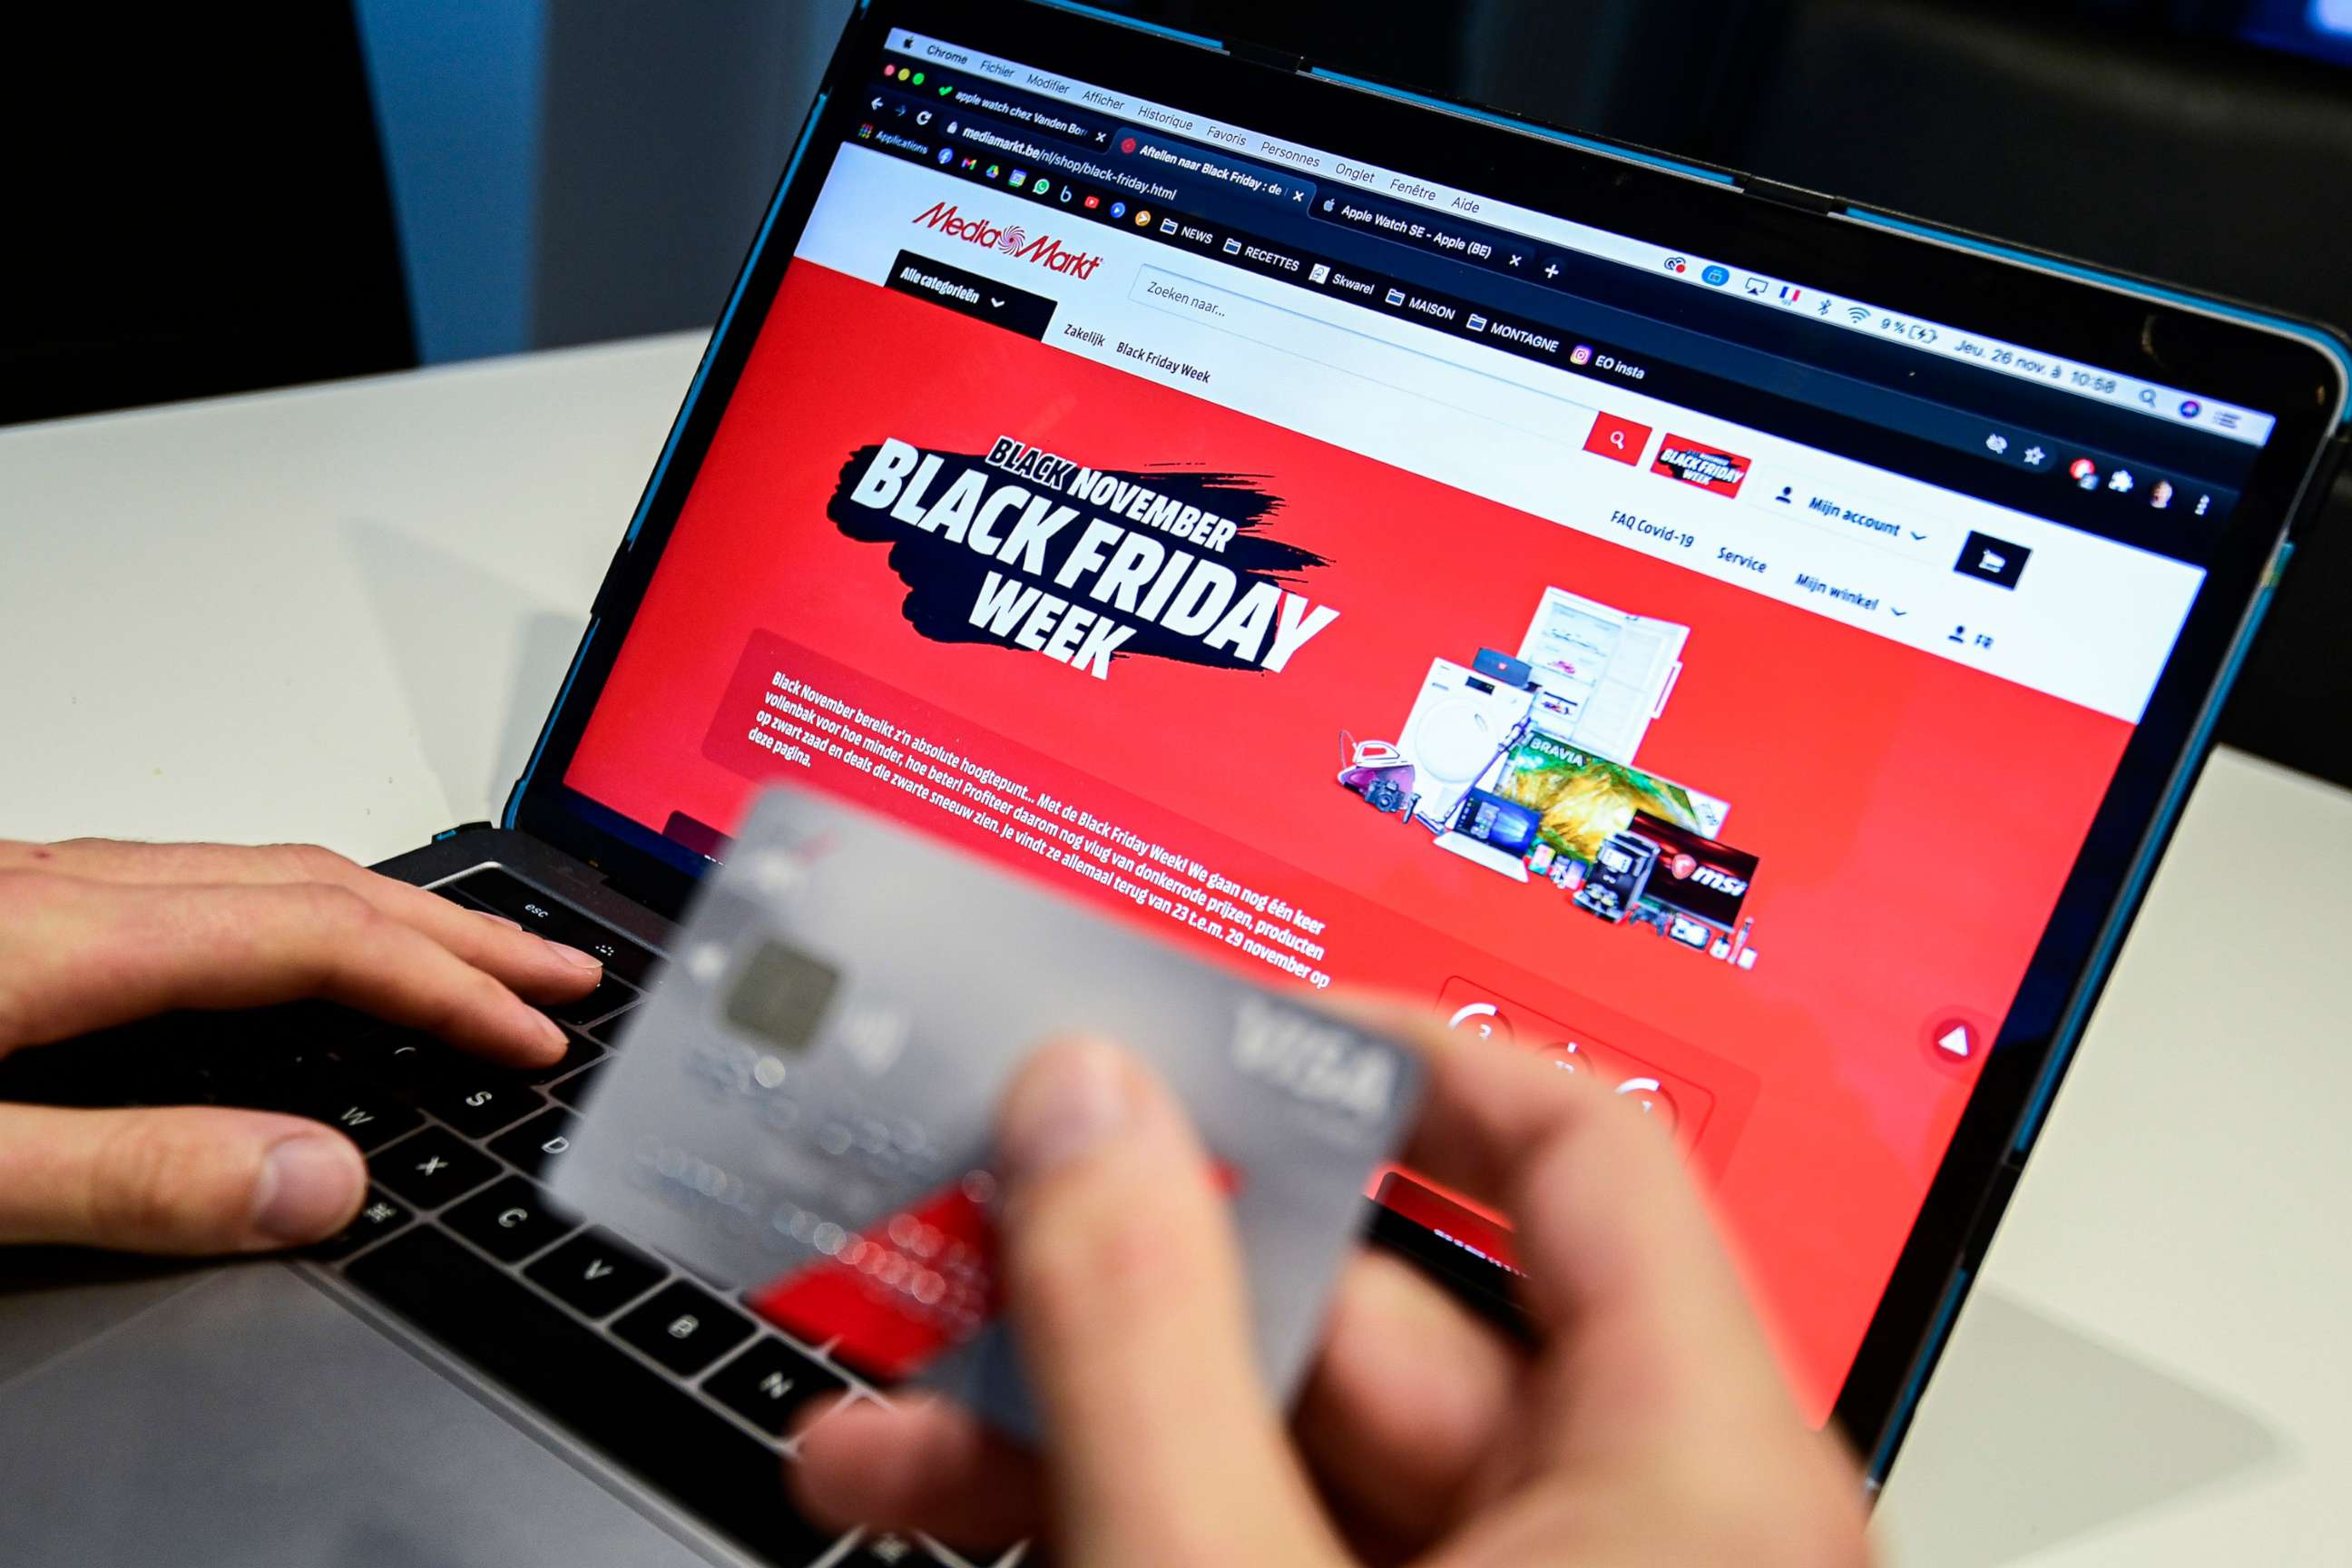 PHOTO: A person is shopping online during the "Black Friday" sales event on November 26, 2020.